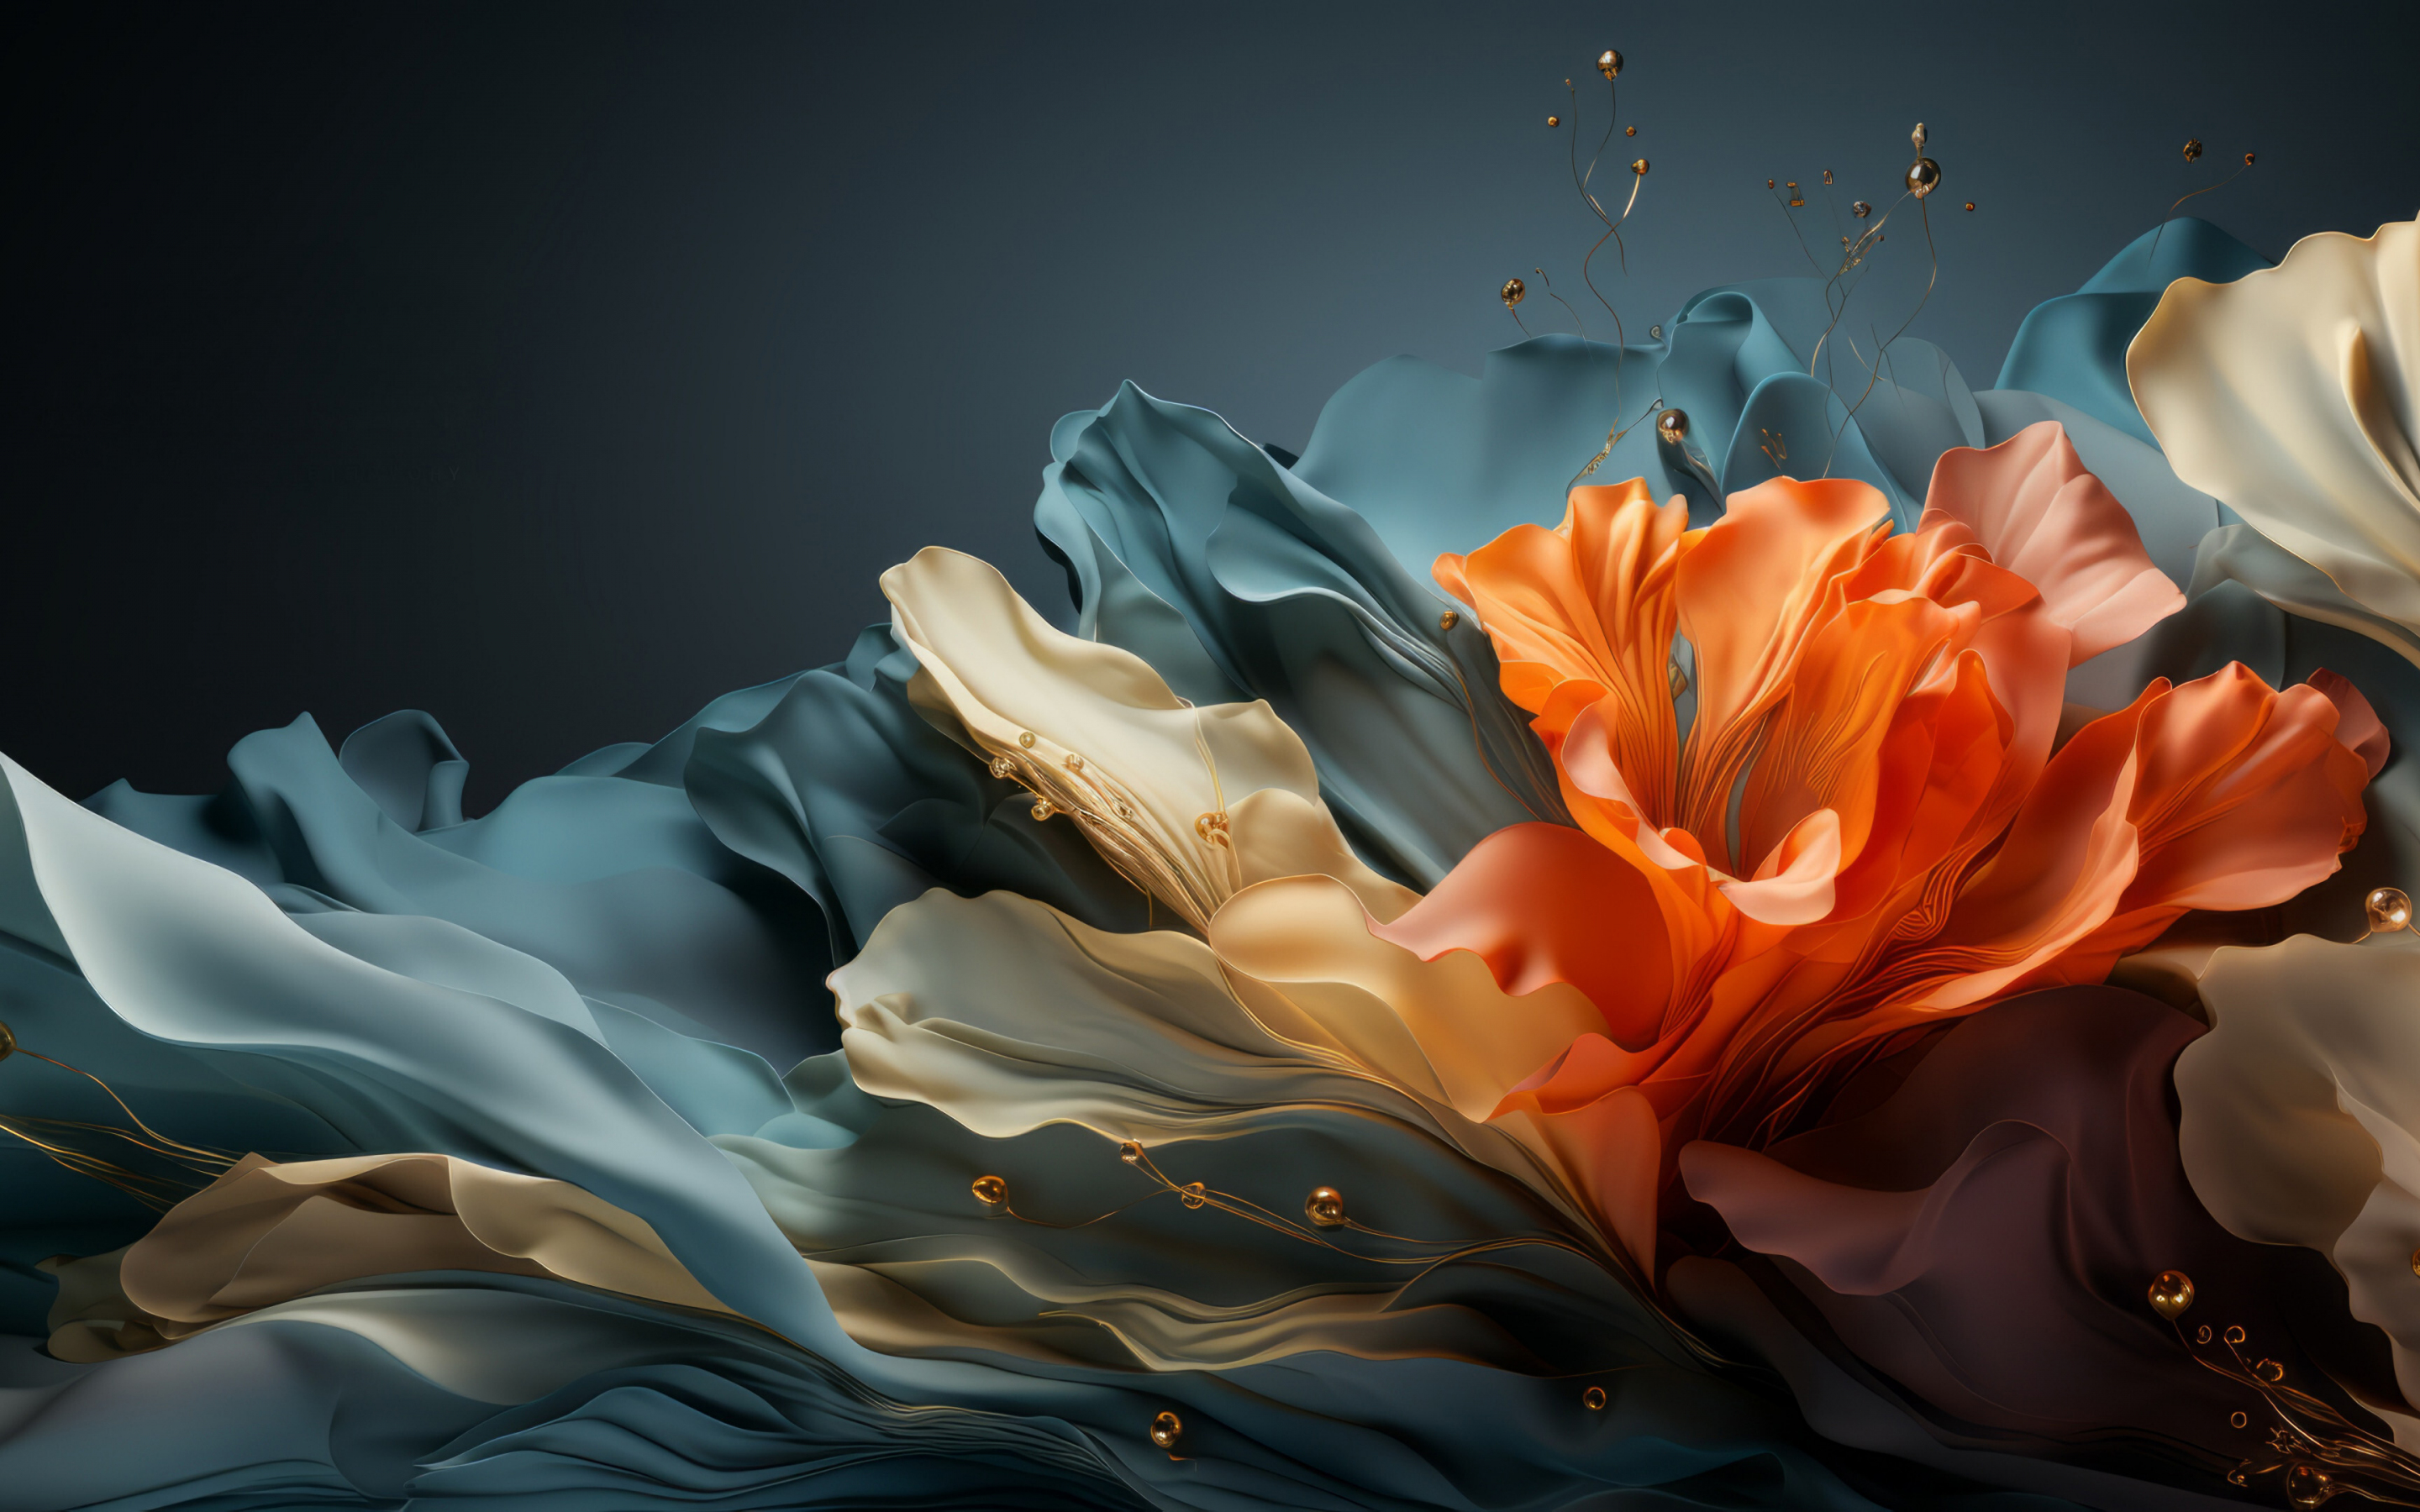 Window 11, stock photo, colorful floral art, 2880x1800 wallpaper